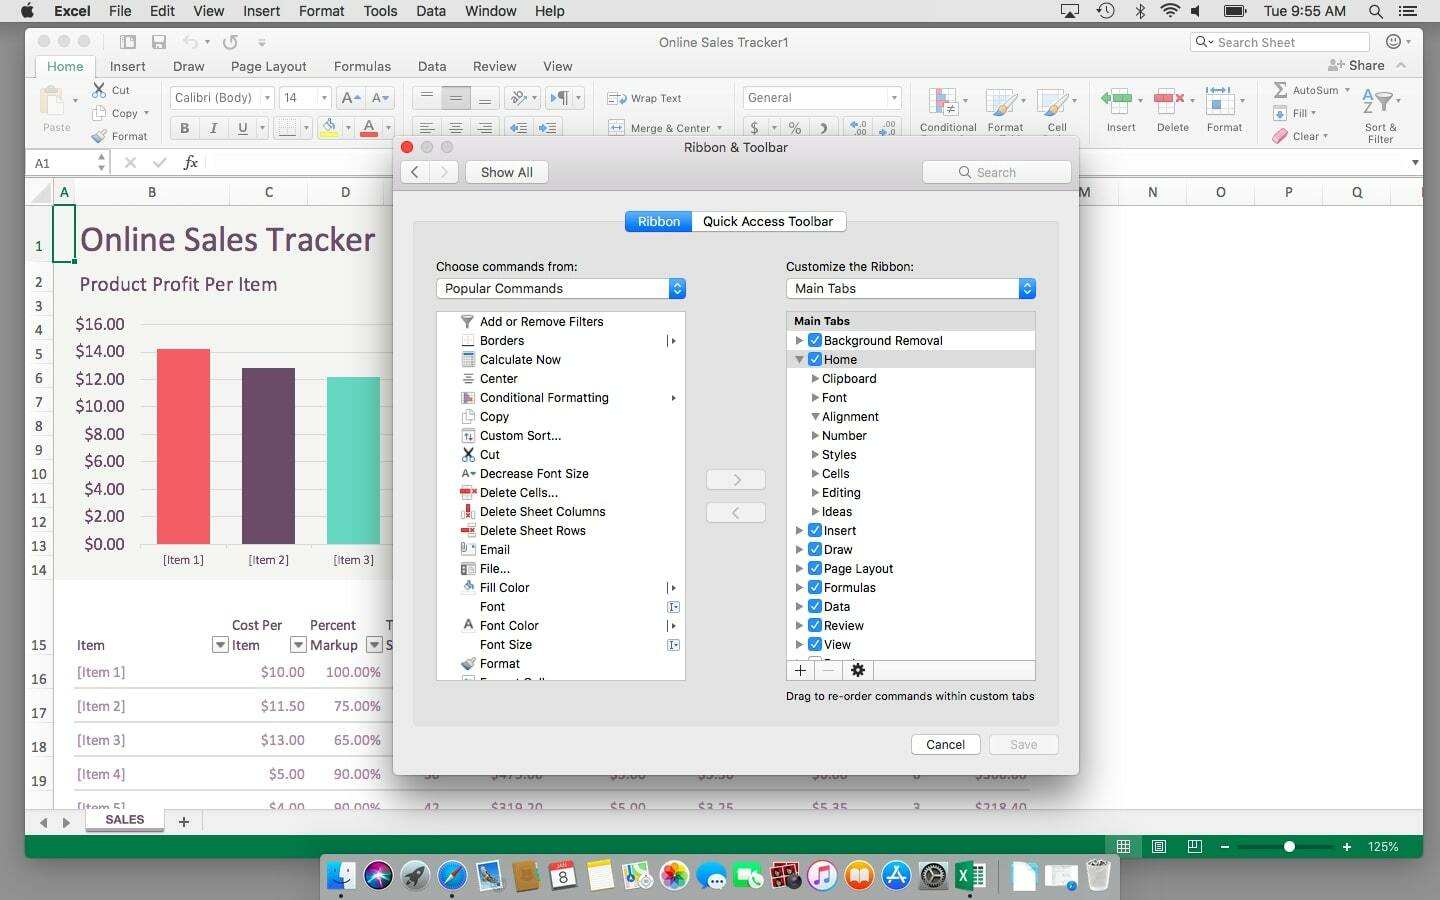 microsoft office for mac lion compatible